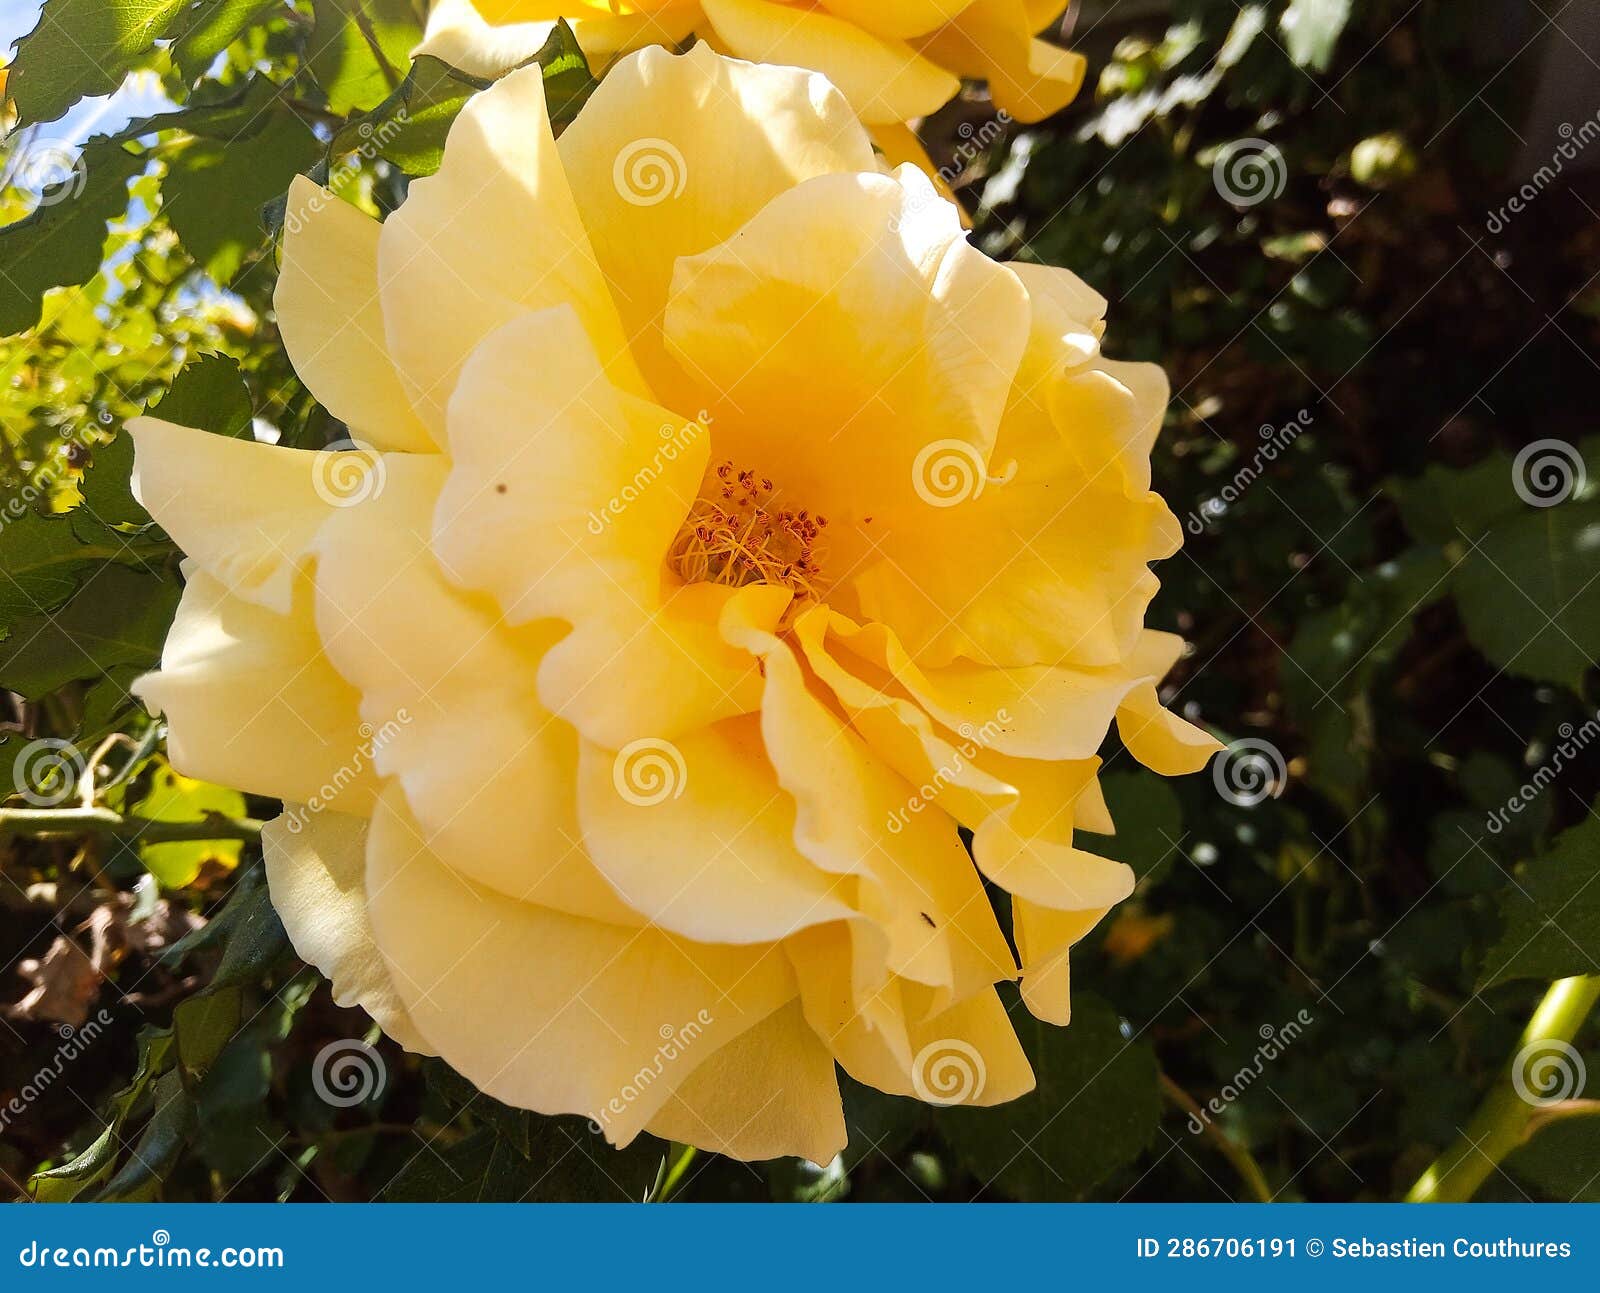 magnificent rose (rosa) of yellow color